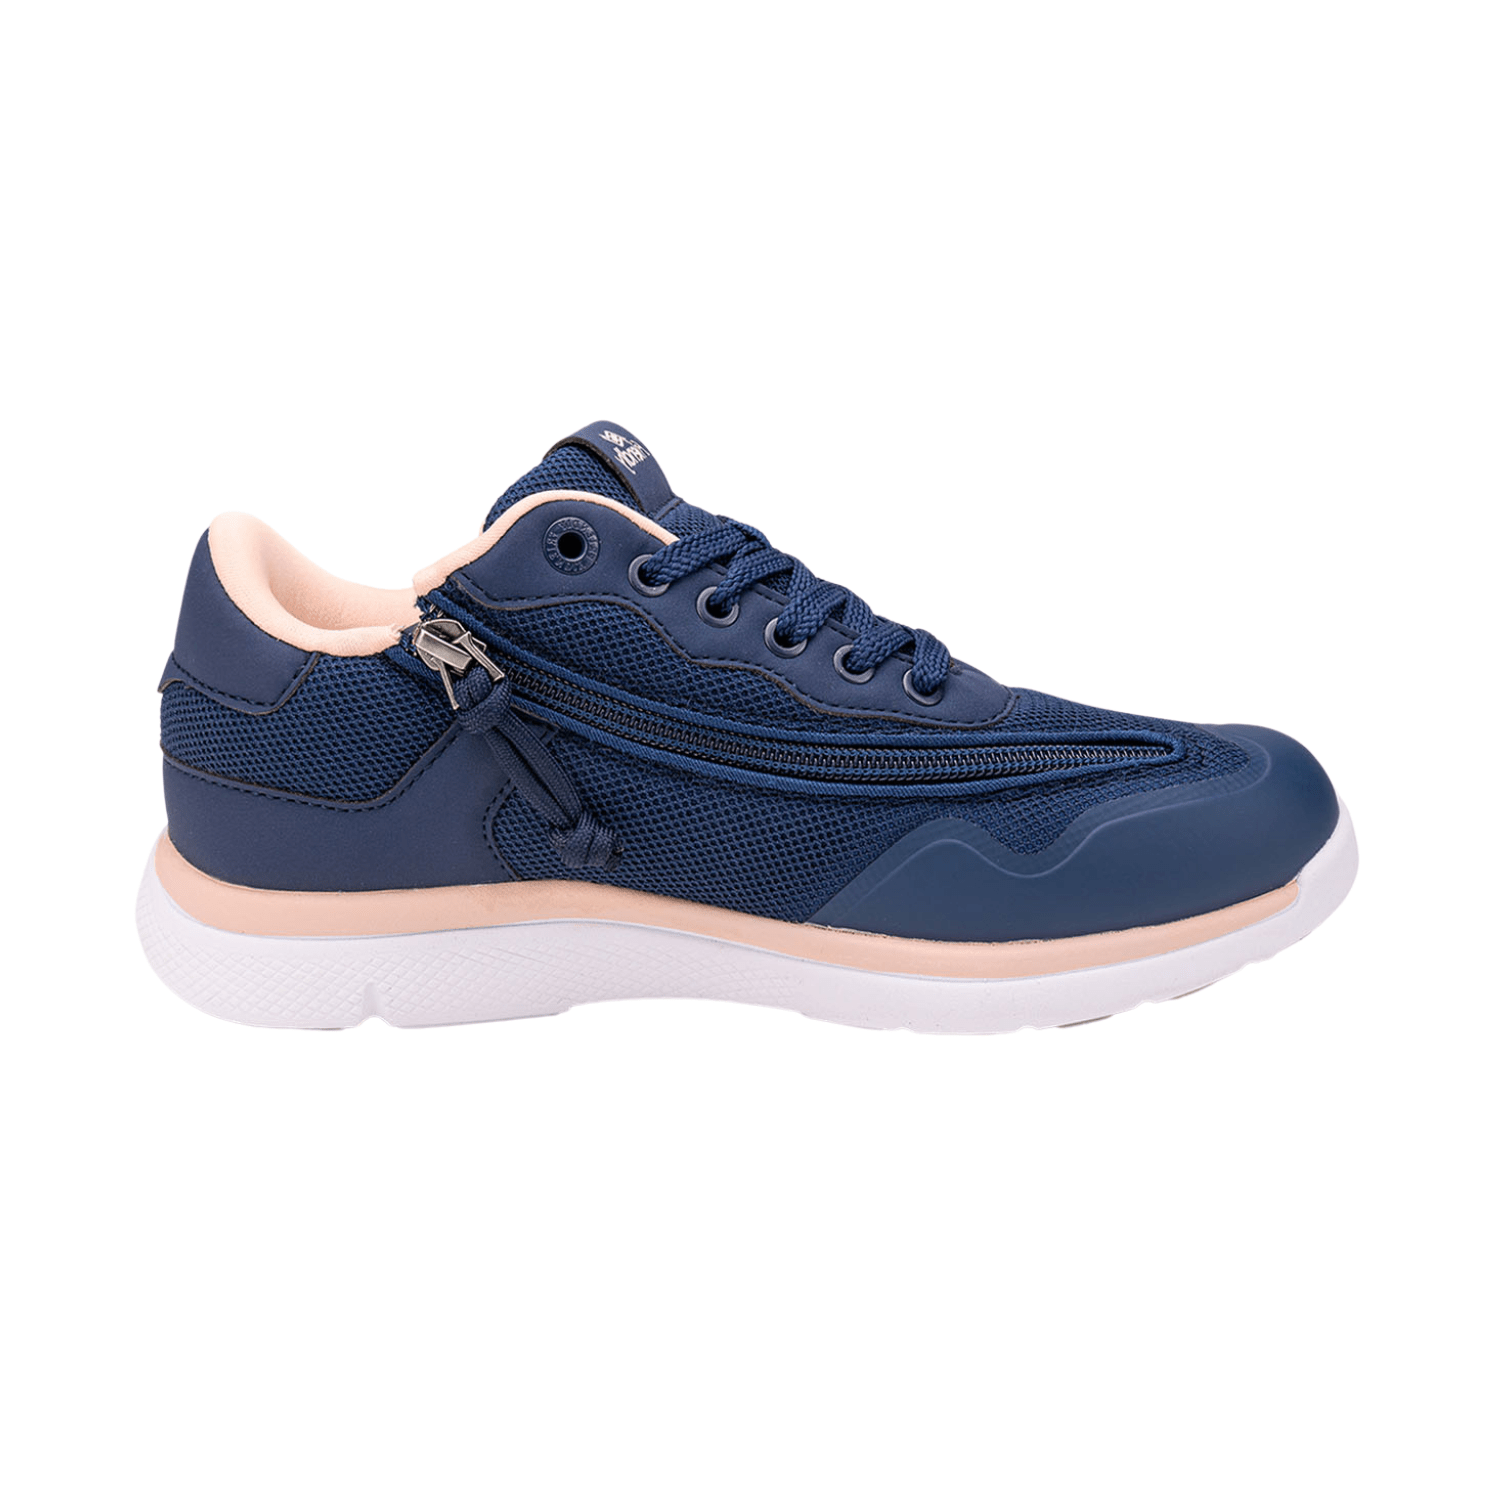 Voyage Navy Blue & Peach Women's Shoe - Friendly Shoes - The Shoe for All  Abilities